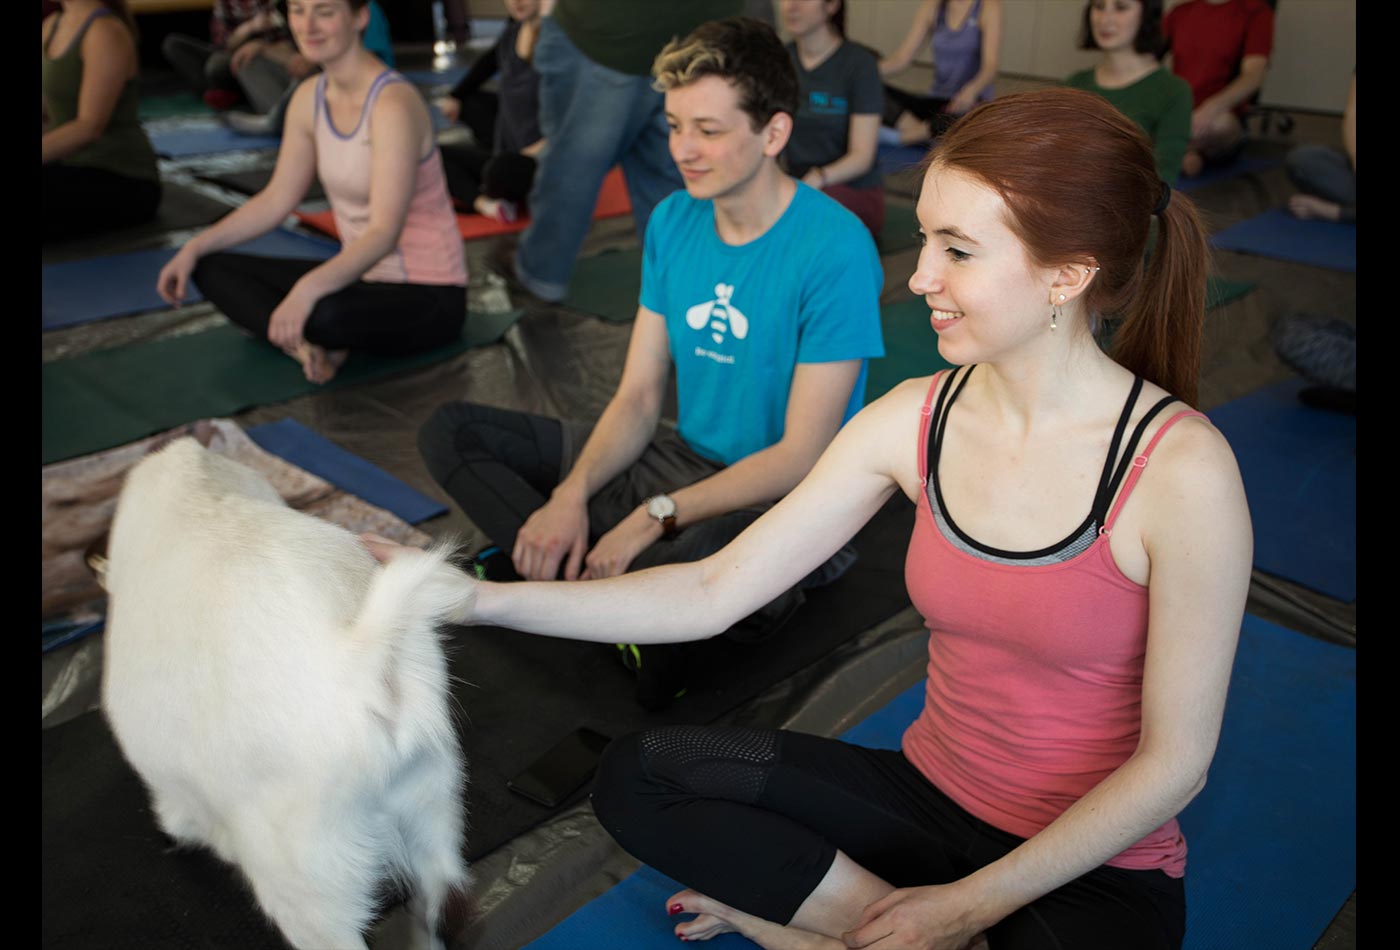 Graduate students smile as a goat wanders through their yoga class.